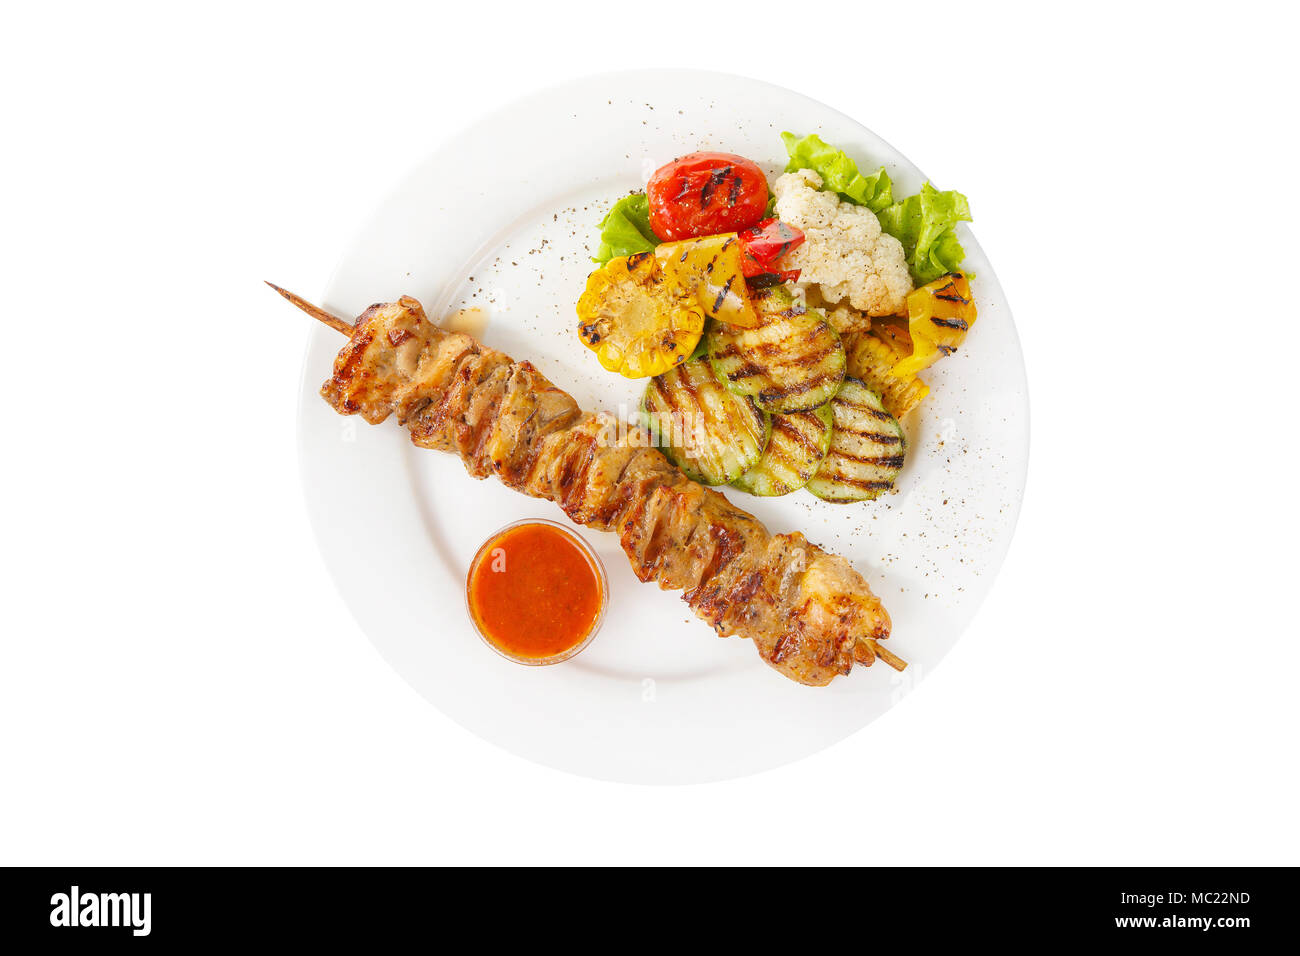 Shish kebab, beef, lamb, pork, chicken grilled meat, barbecue, with side dish vegetables, isolated on white background. Ketchup, tomato, red sauce. Vi Stock Photo